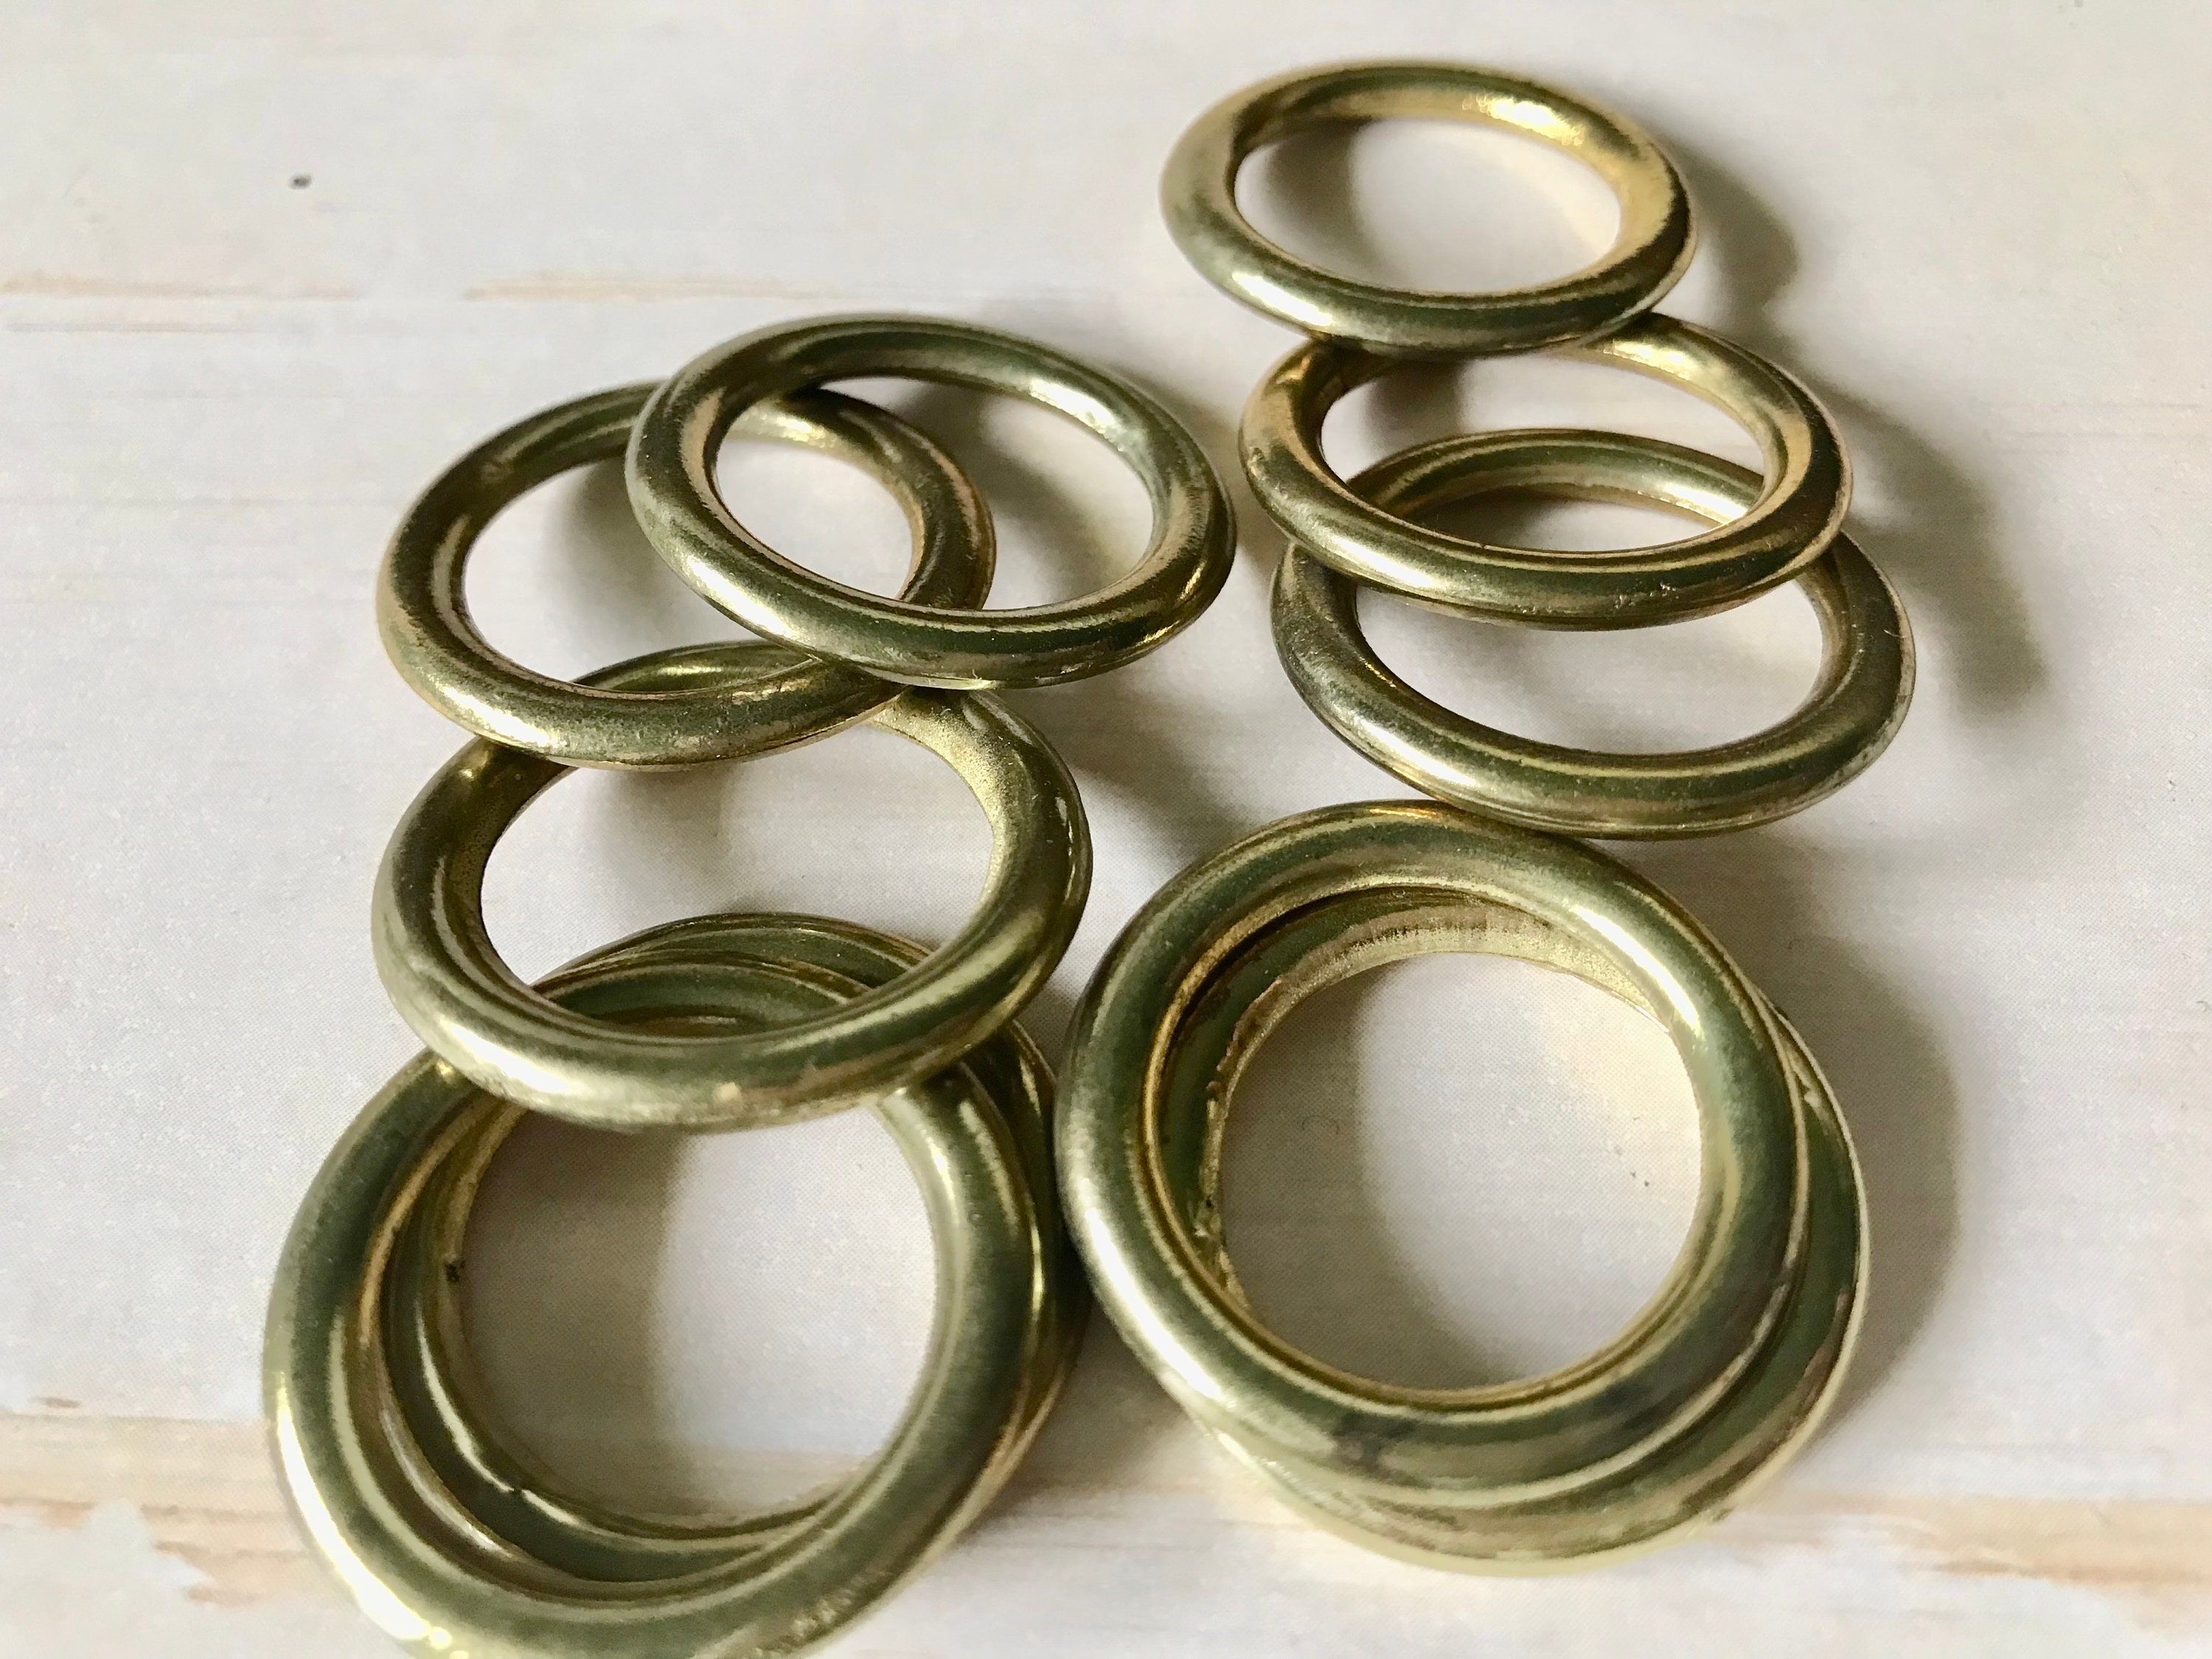 Metal O Rings, 8 Pack 30mm(1.18) ID 3mm Thickness Multi-Purpose Non Welded  O-Ring Buckle, Gold Tone